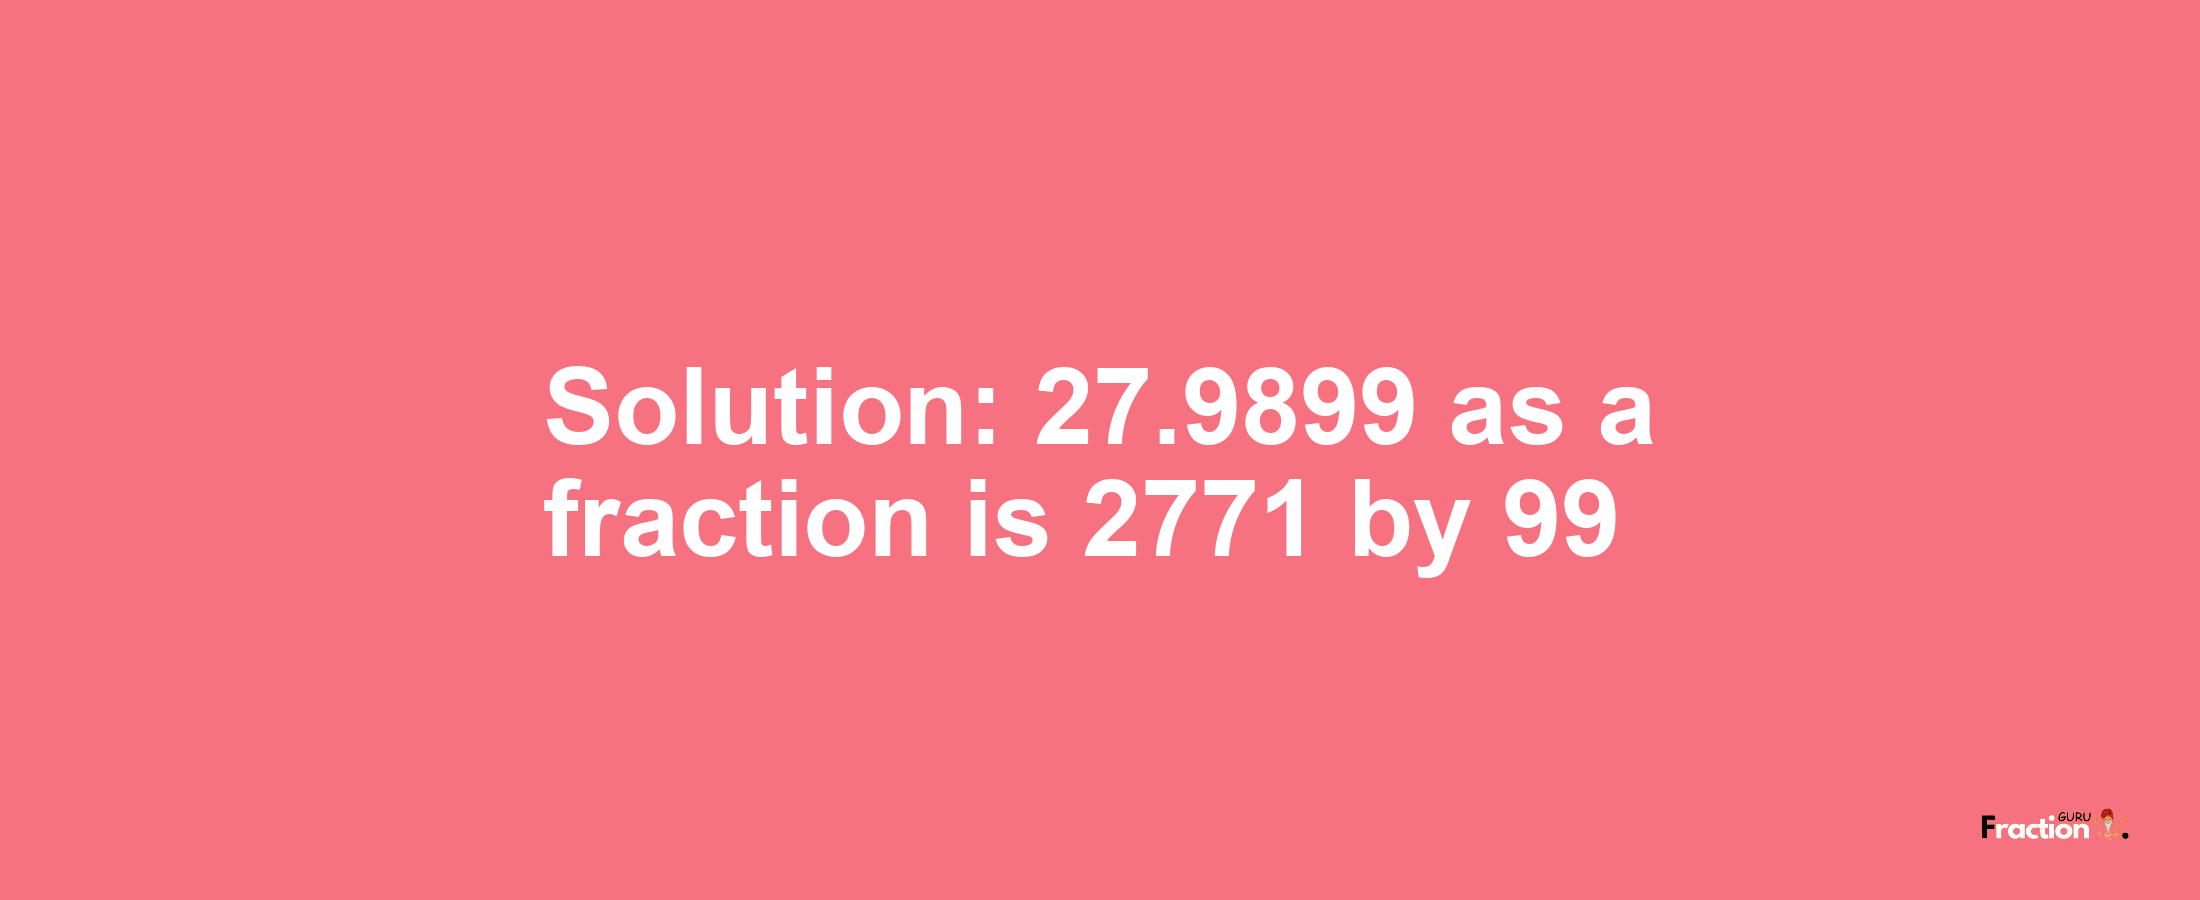 Solution:27.9899 as a fraction is 2771/99